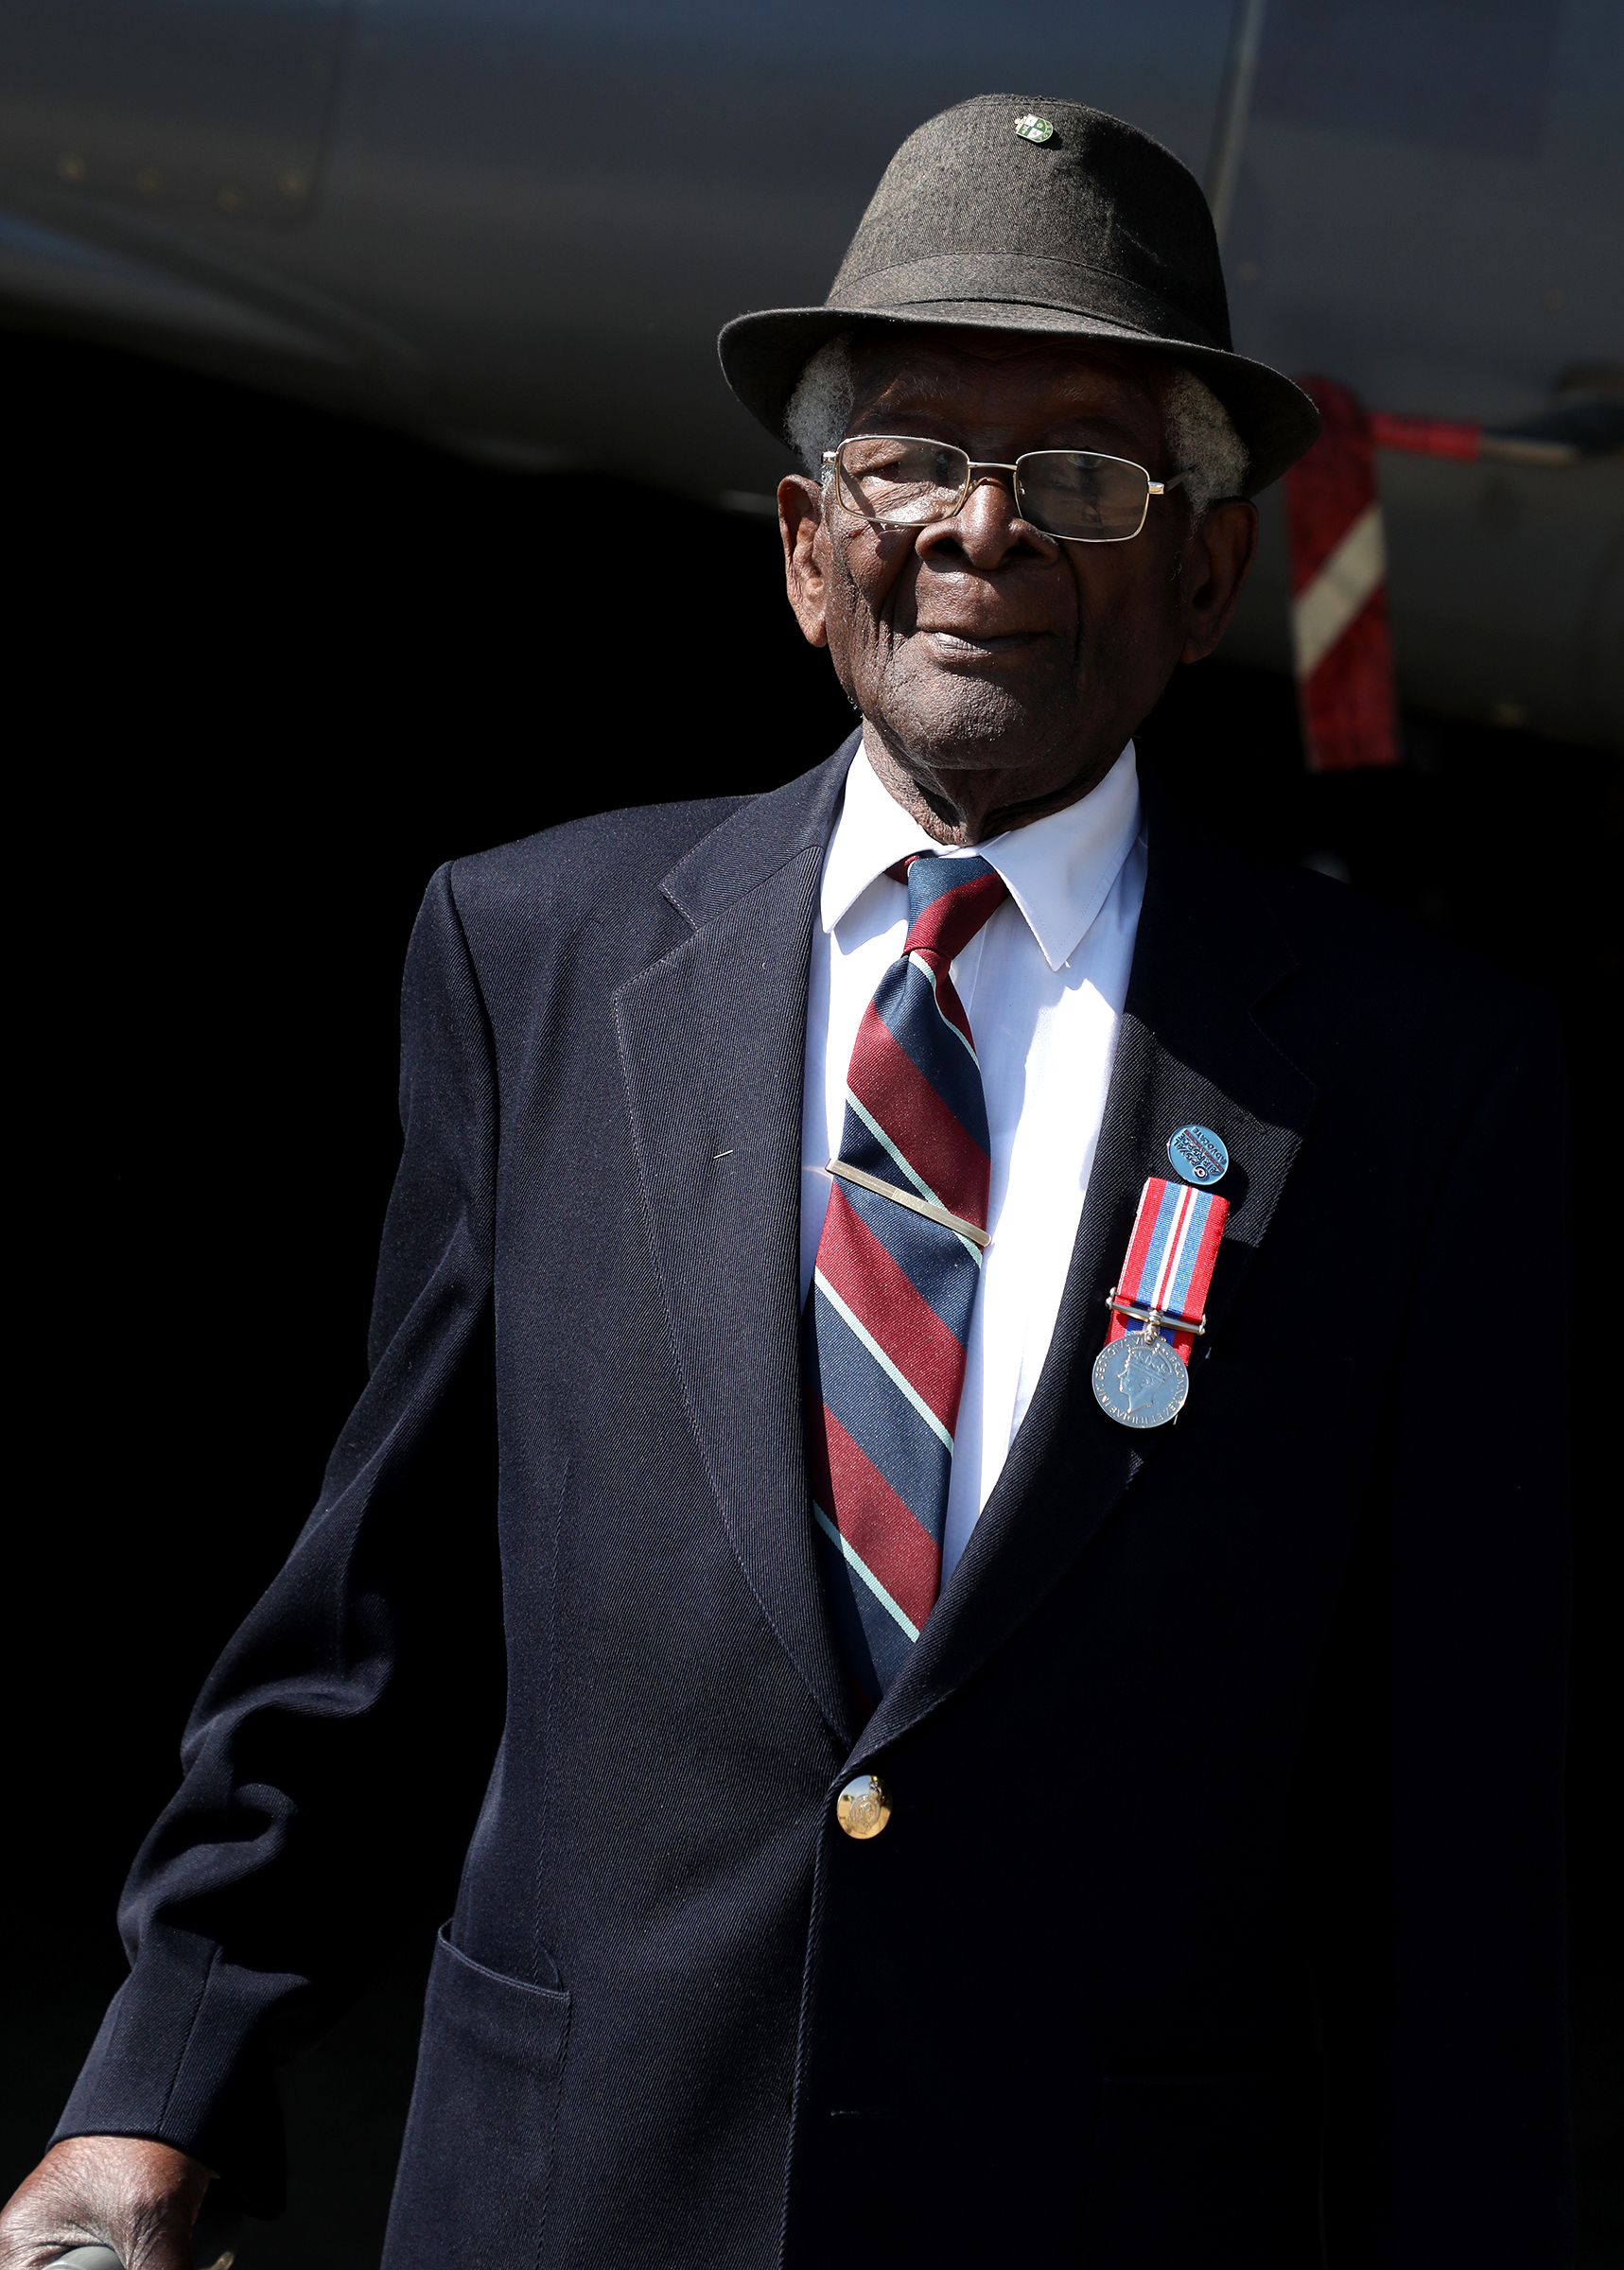 98-year-old RAF Veteran Mr Albert Jarrett, a driver and weapons instructor during World War Two